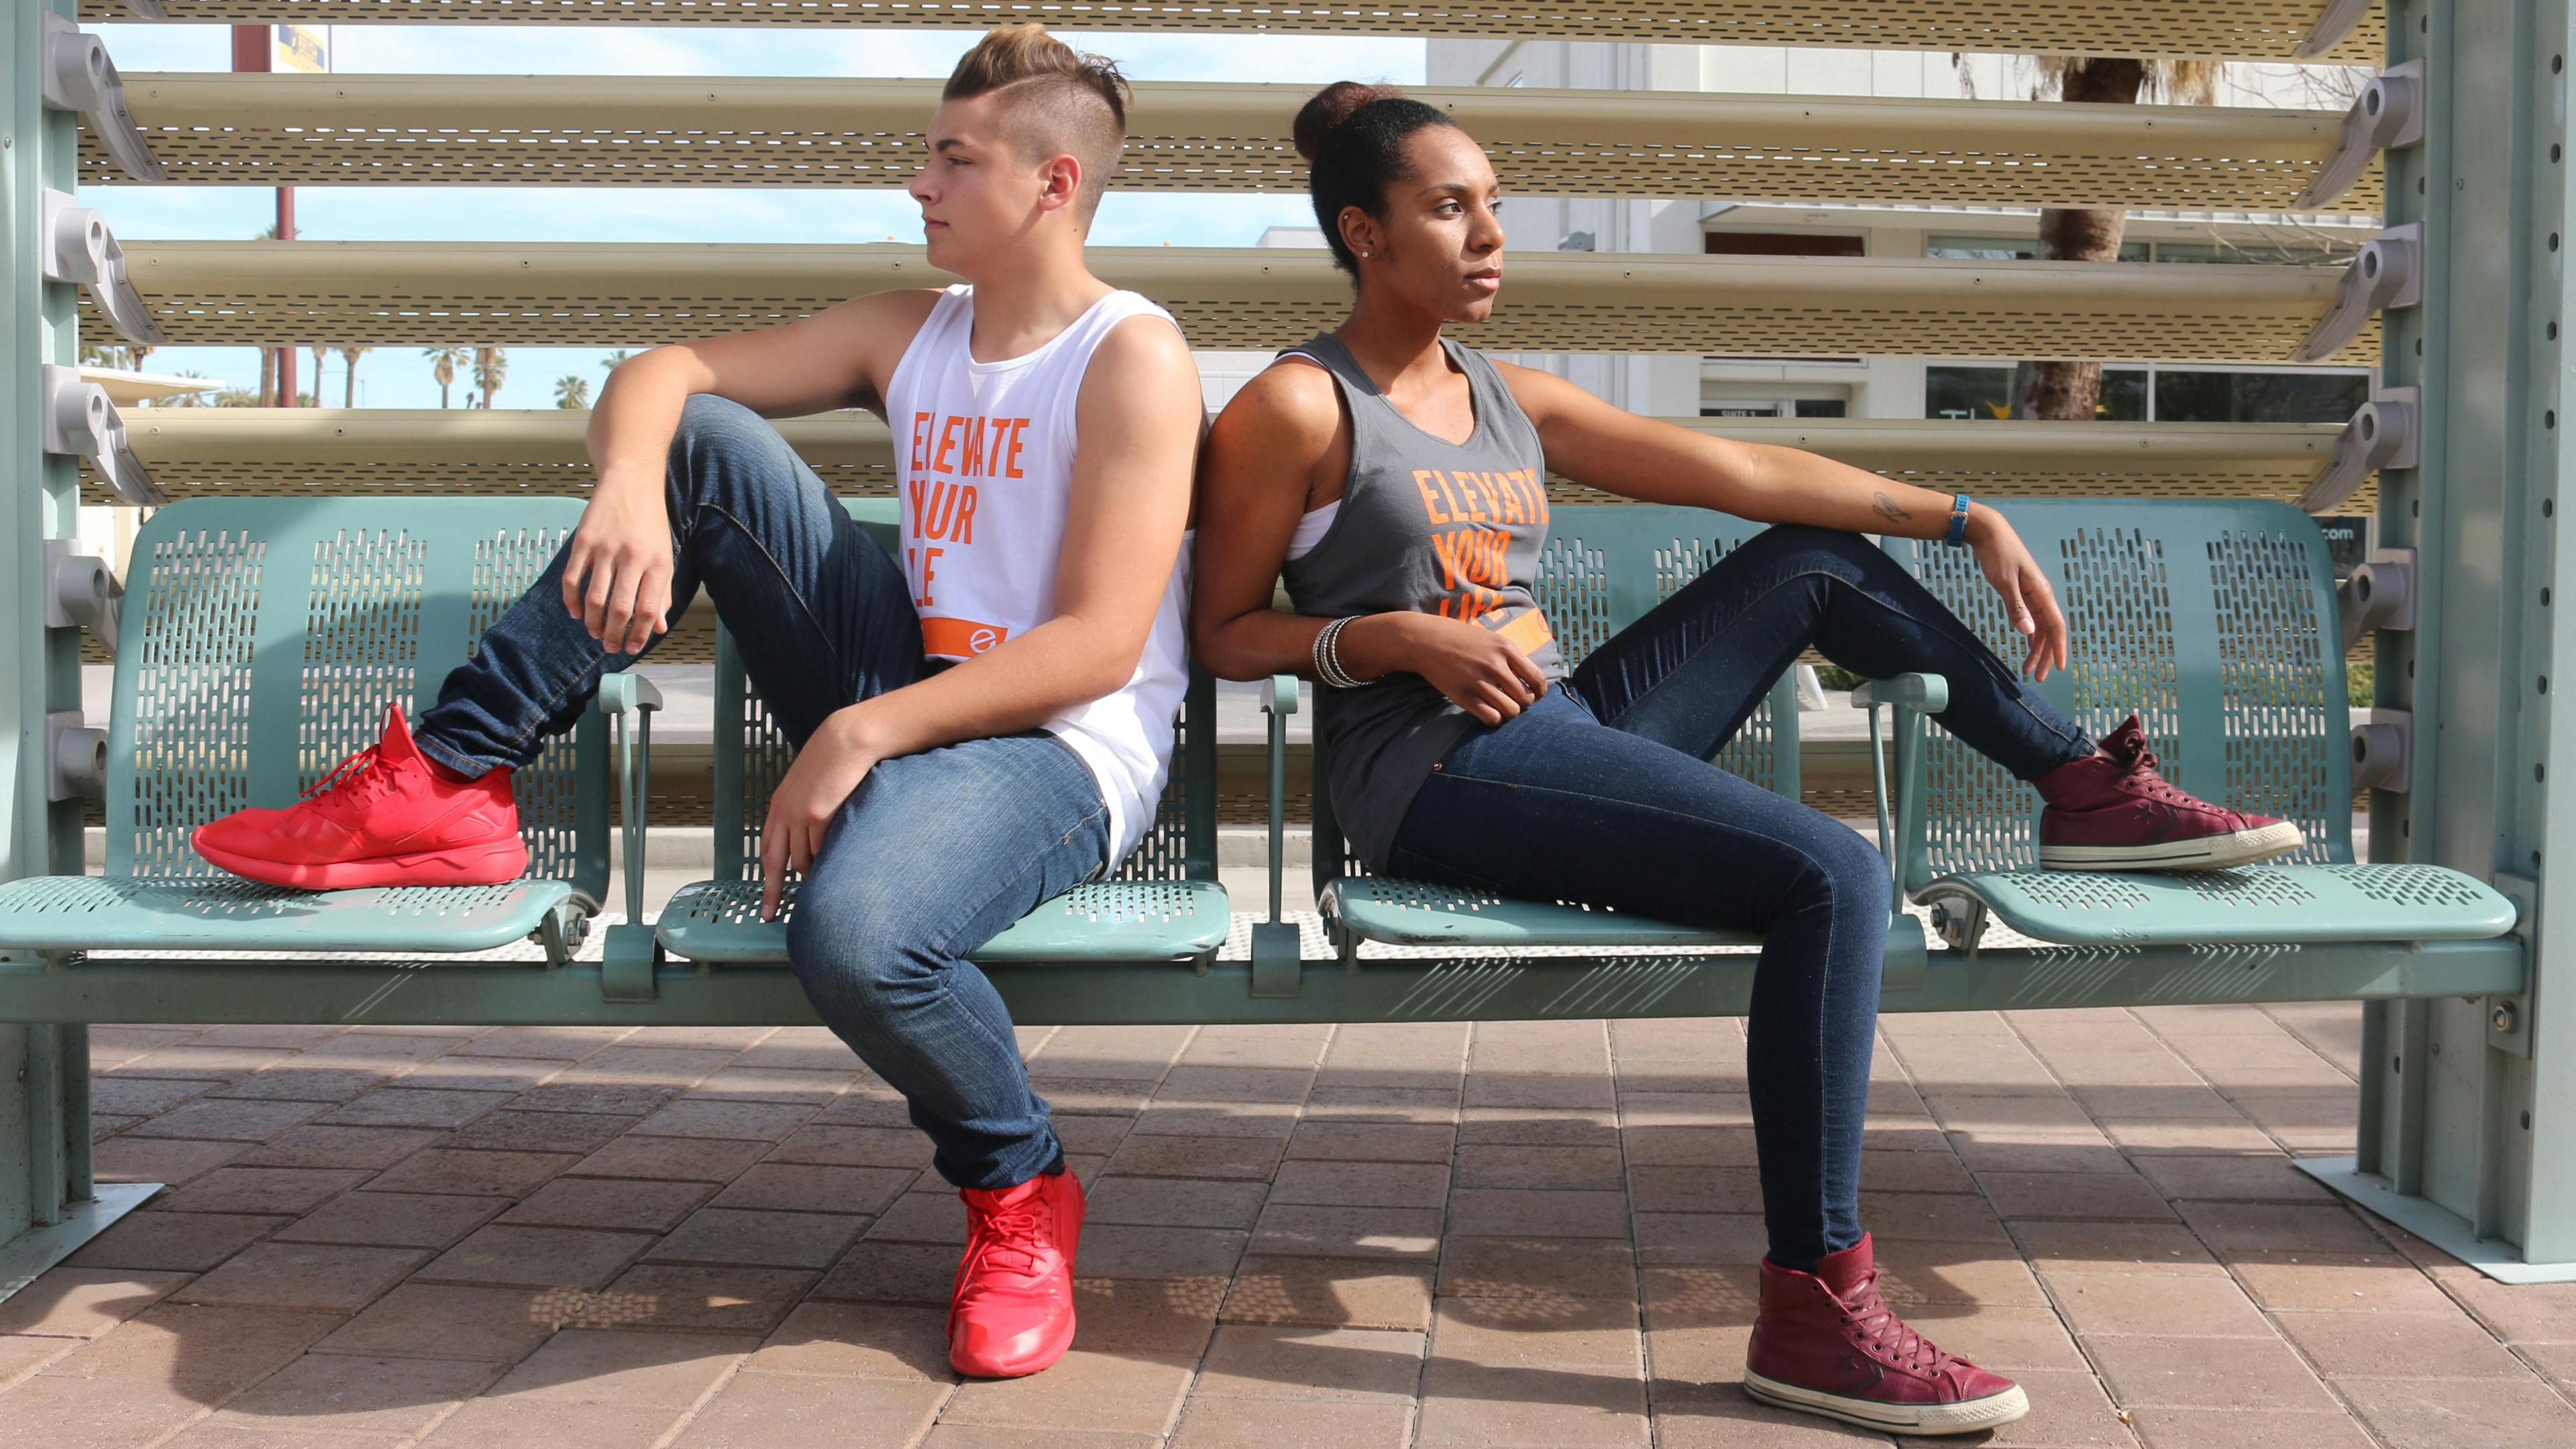 A guy and a girl back to back sitting on a bus bench wearing different color Elevate Your Life tanks